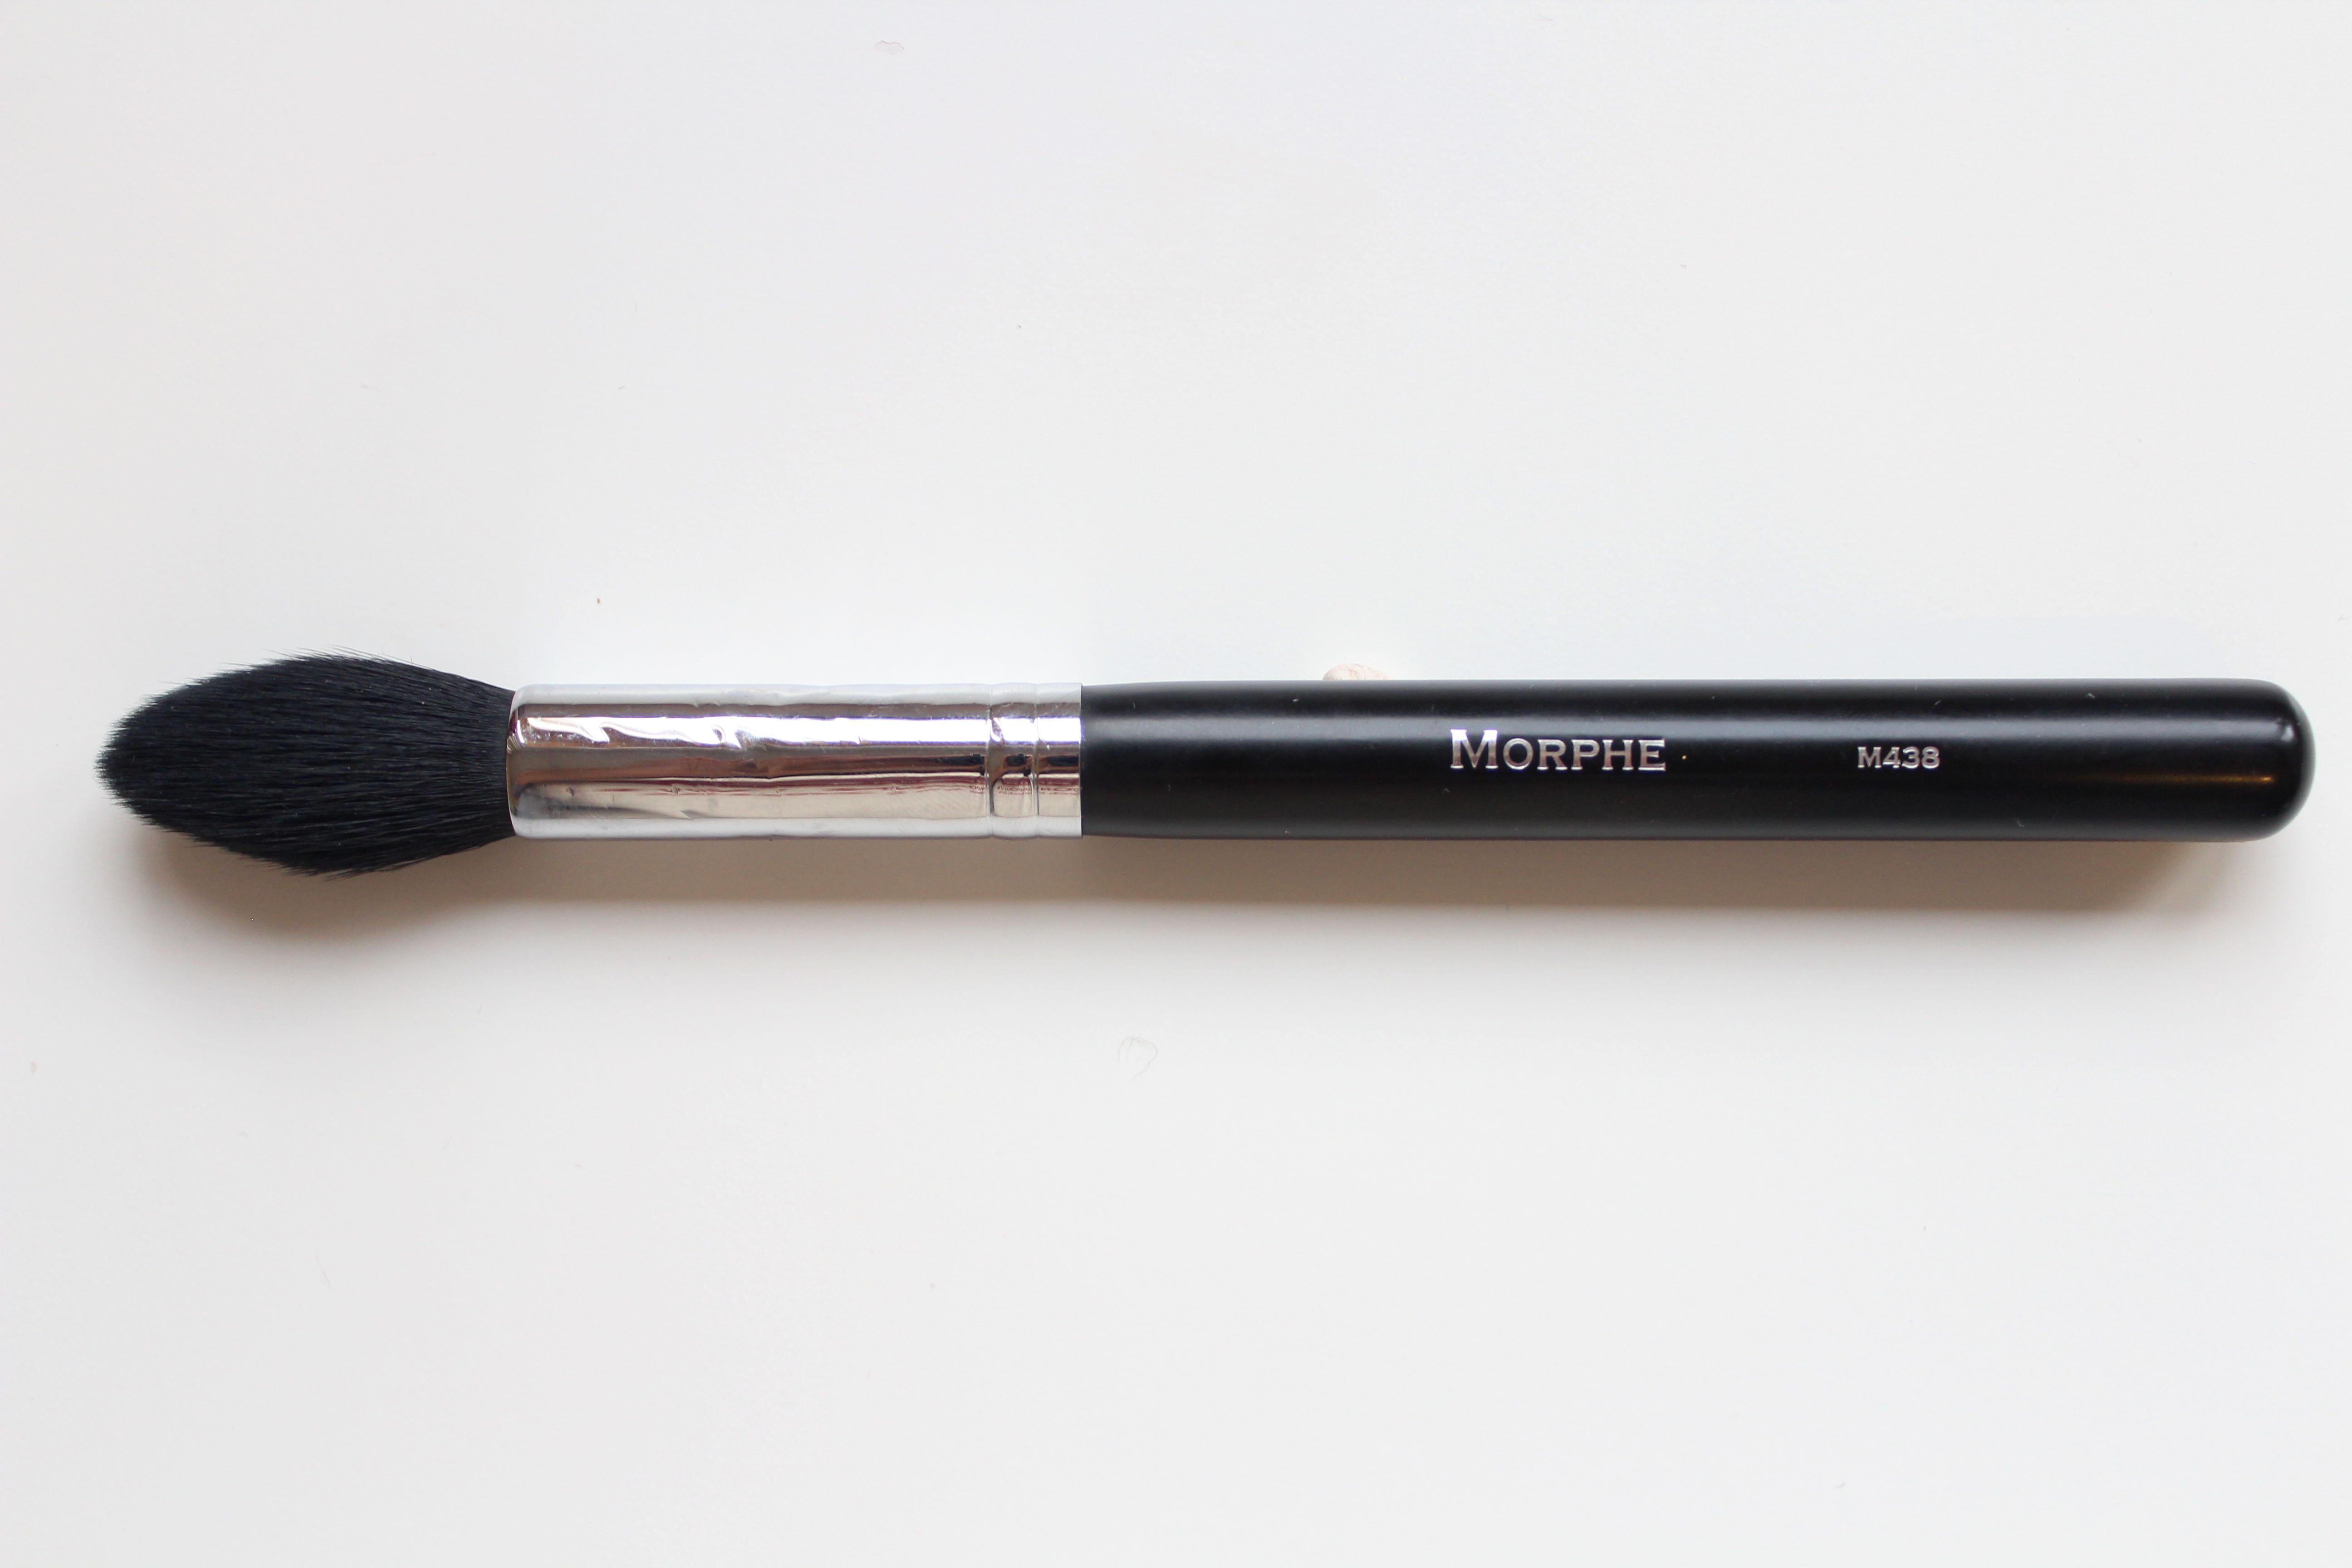 Morphe M438 Pointed Blender review by Facemadeup.com